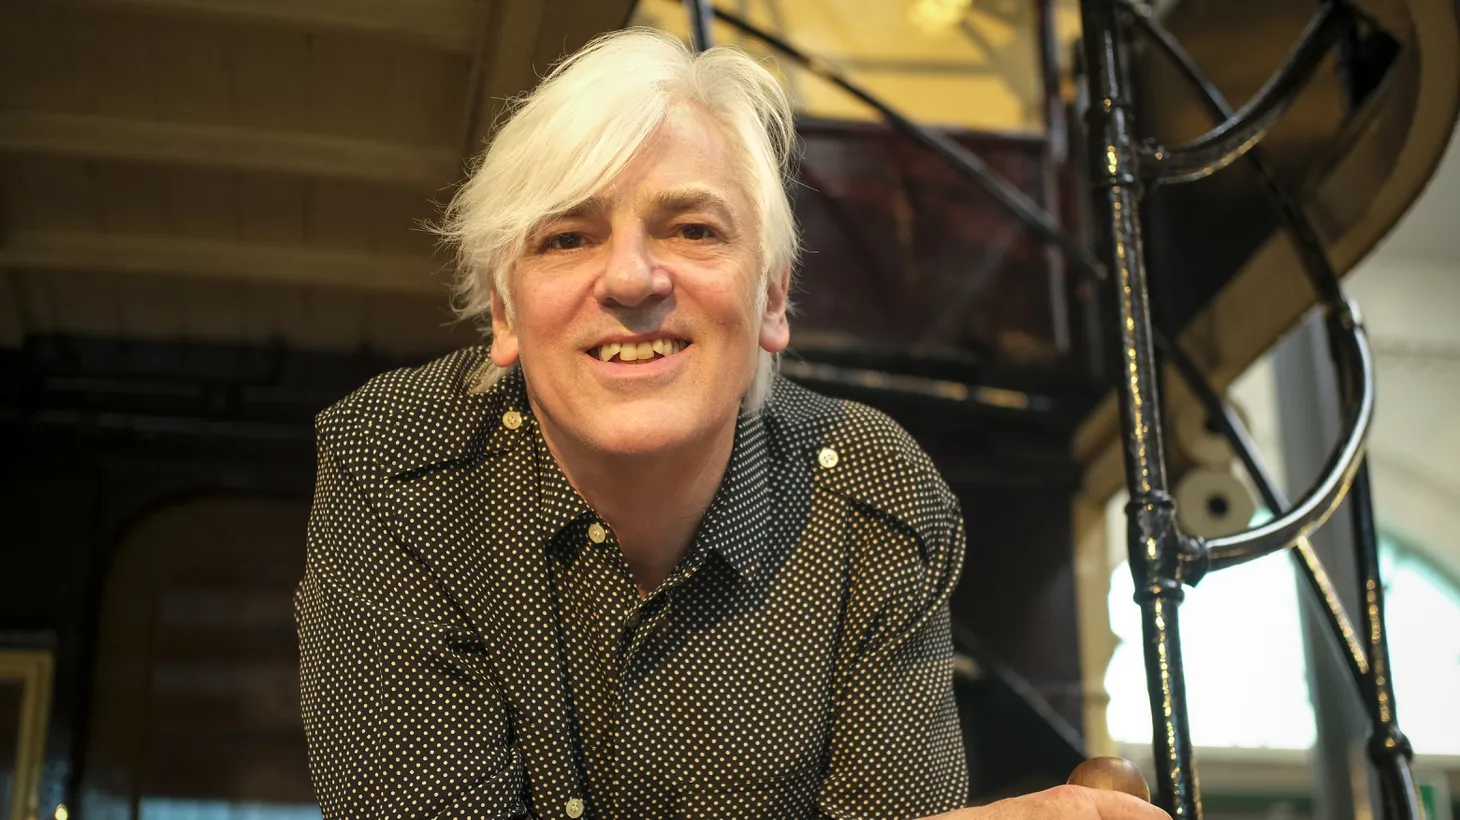 The myth, the man, the legend that is Robyn Hitchcock returns with his first full-length collection in five years. “Shufflemania” has all the wit, keen insight, and style that lures us in. We are excited to share “The Shuffle Man.”